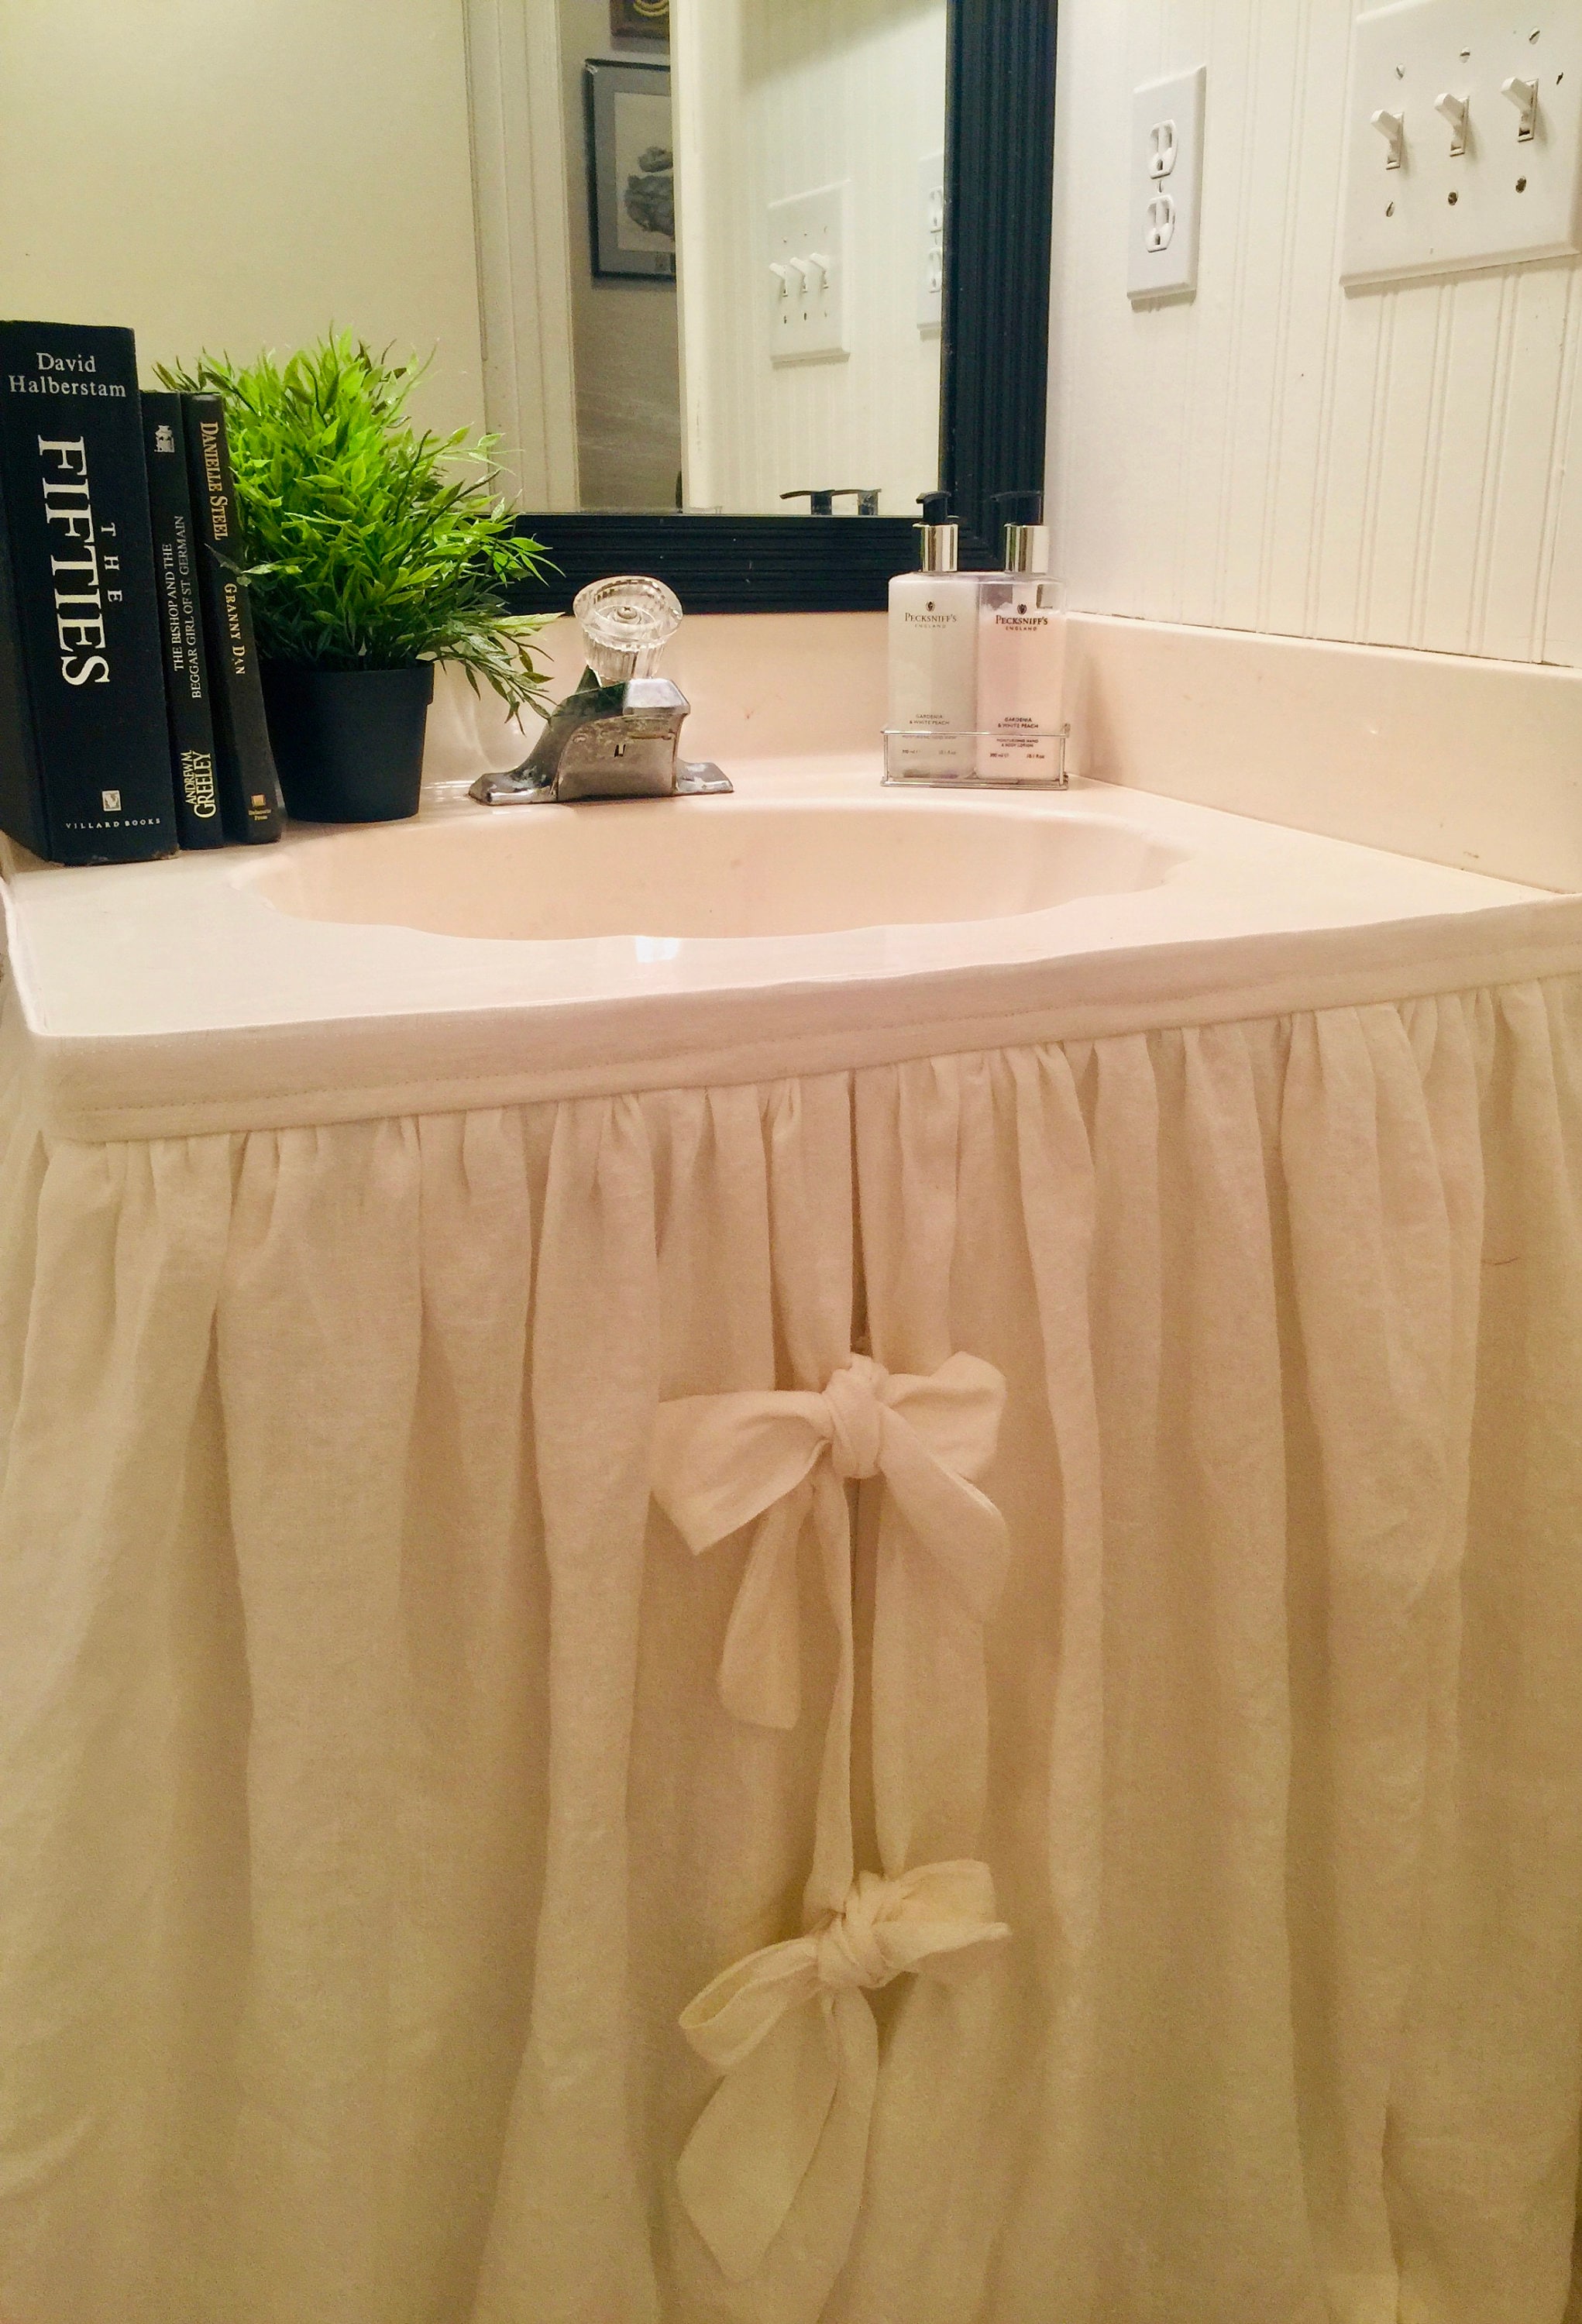 Sink Skirt With Velcro/ Sink Skirt for Bathroom or Kitchen/ Curtains for  Cabinets and Shelves/ Dorm Décor/ Dorm Curtains/ Utility Sink Skirt 